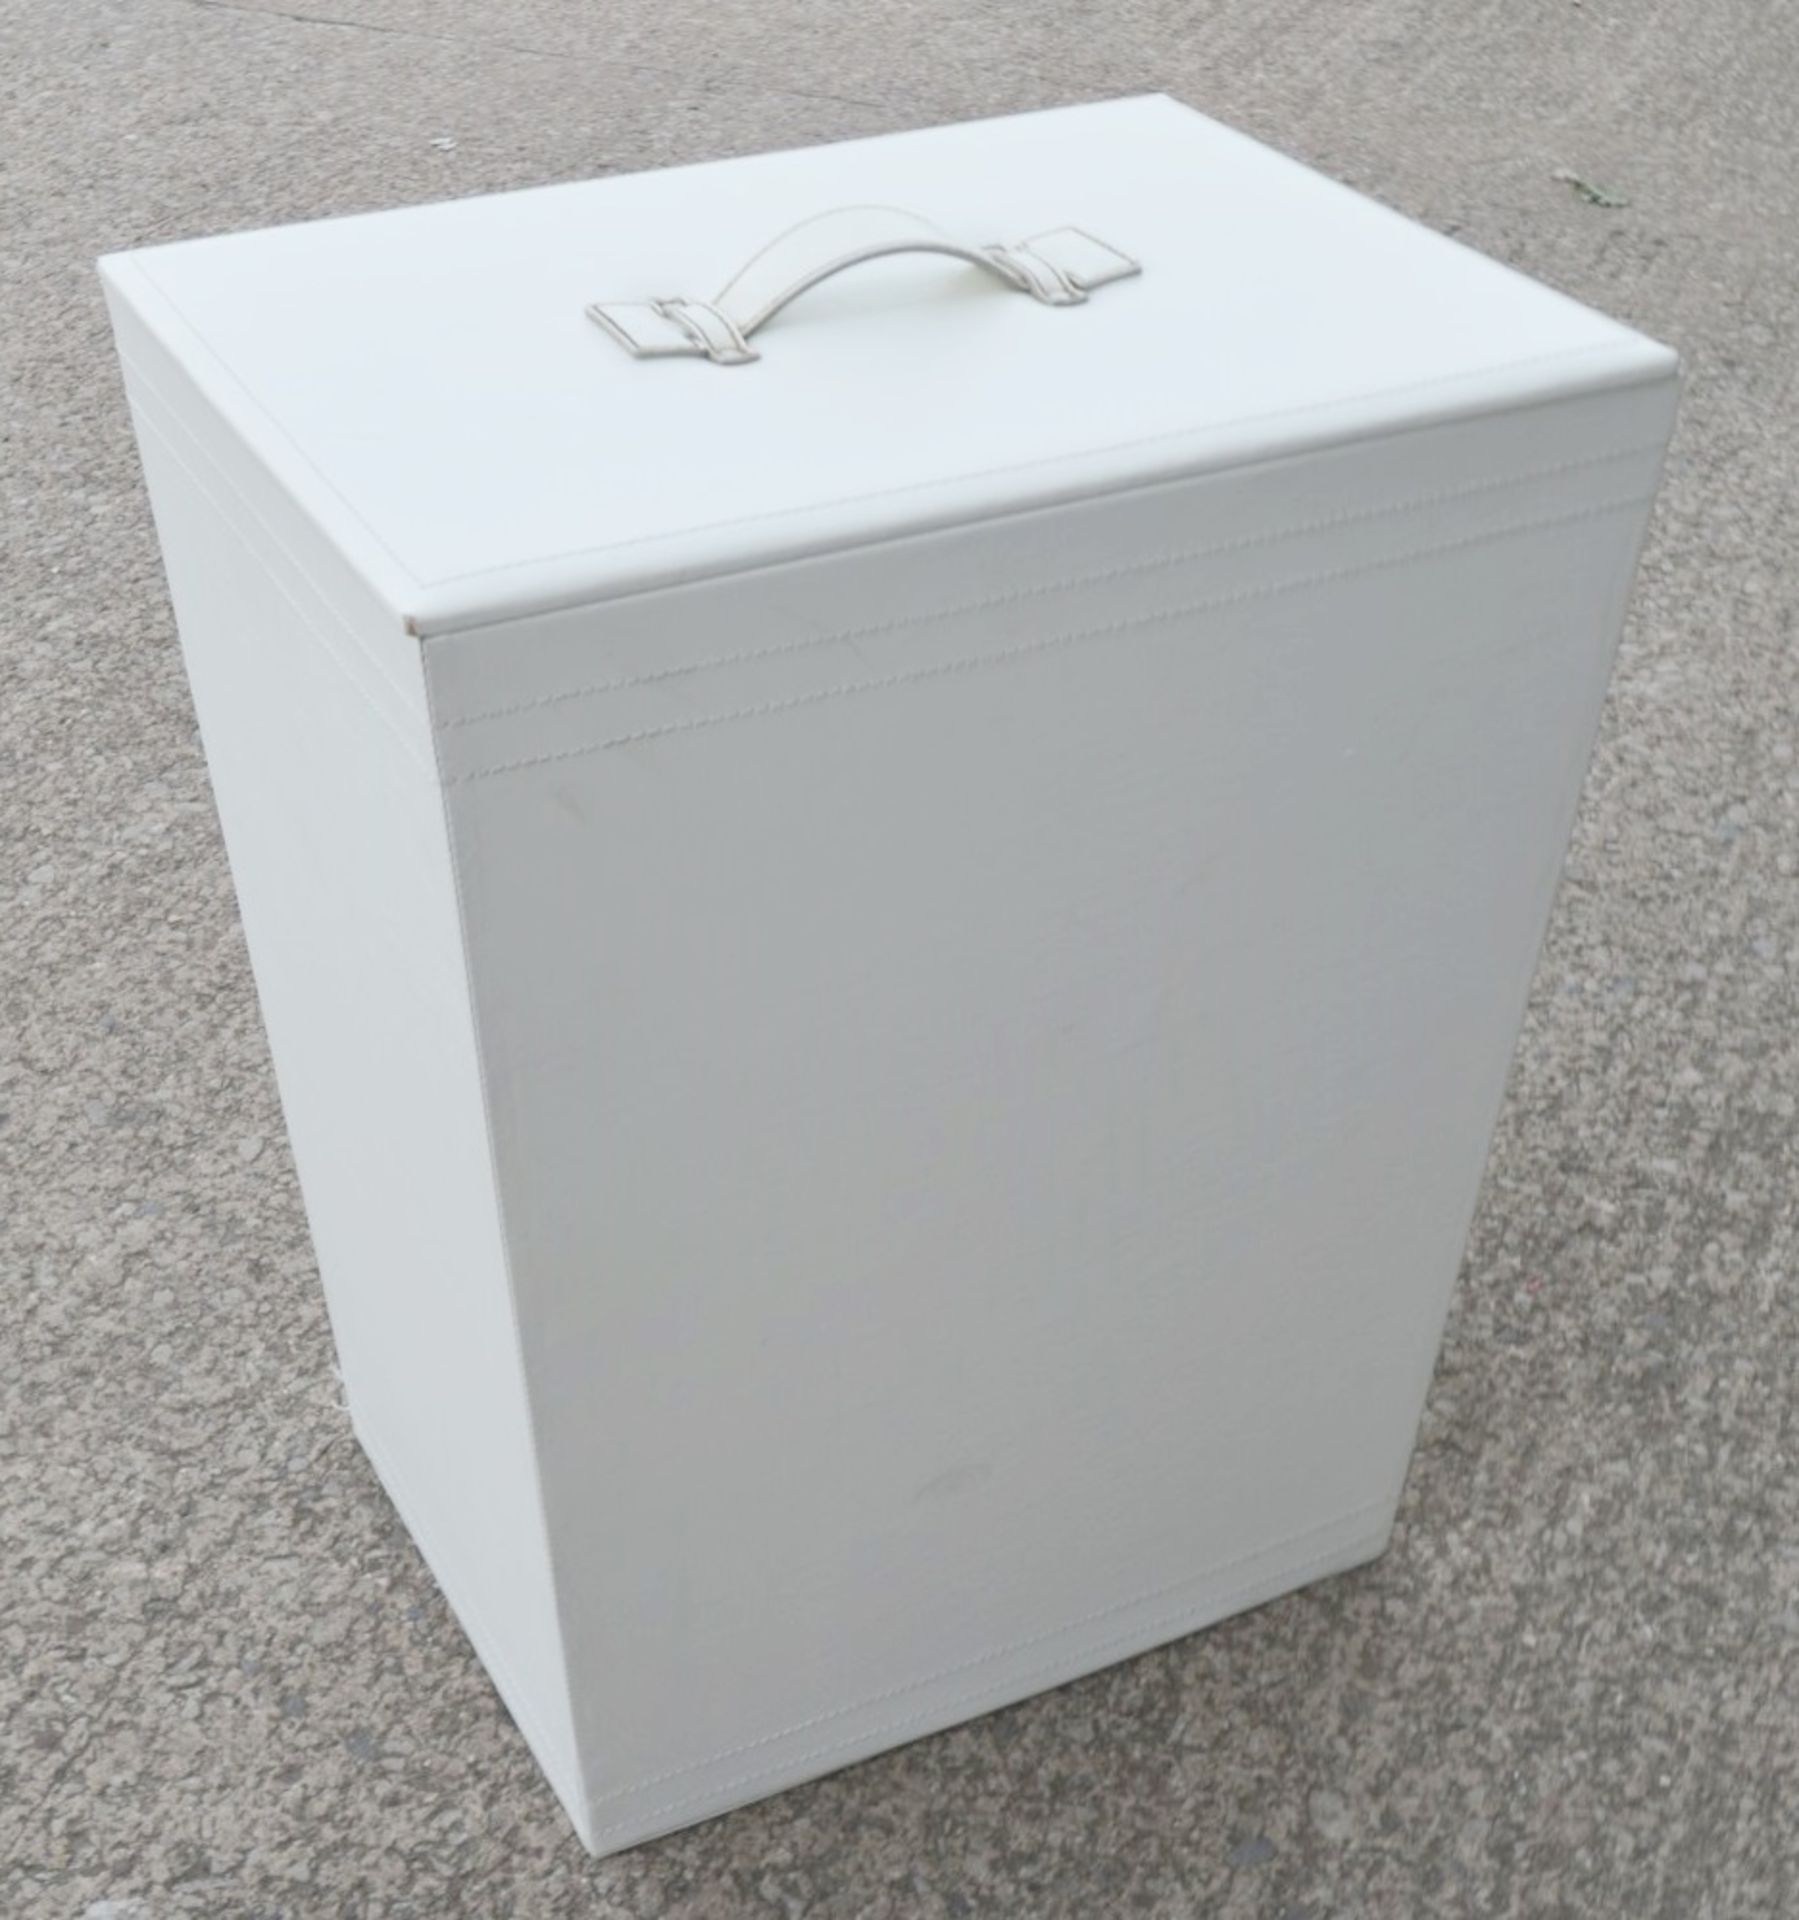 1 x Faux Leather Laundry Basket In Cream - Preowned, From An Exclusive Property - Dimensions: H56